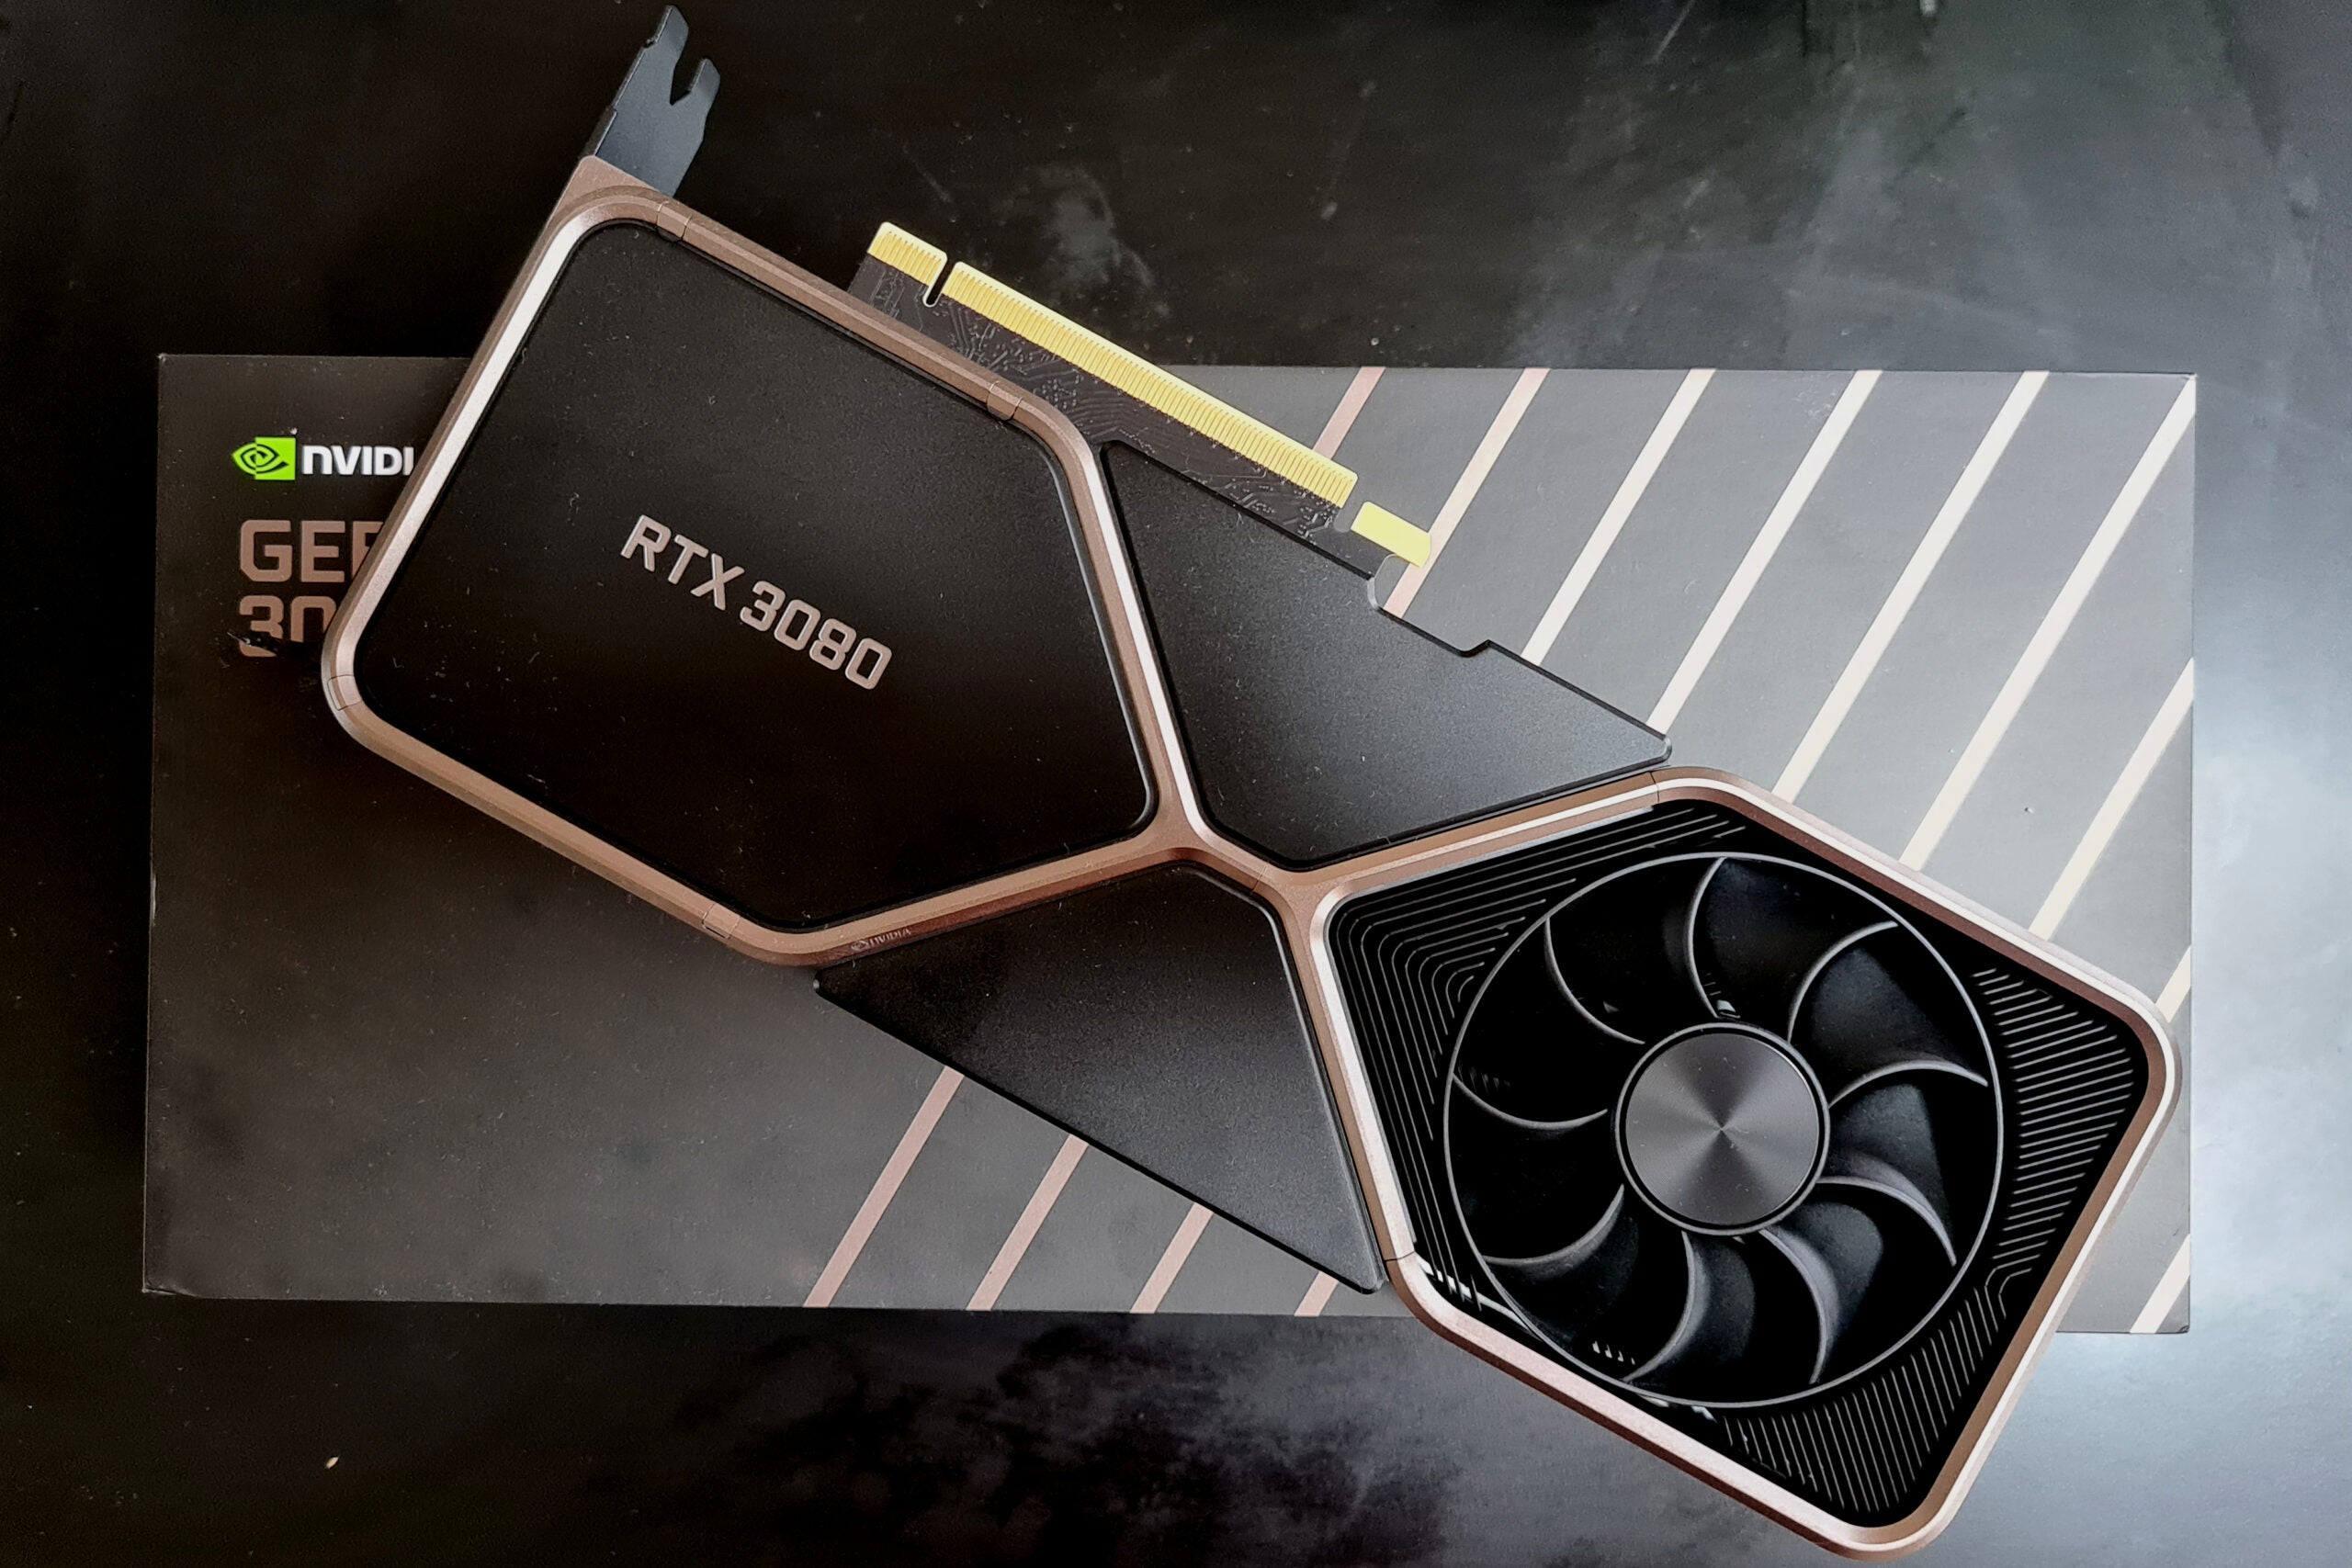 Nvidia GeForce RTX 3080 Review | Trusted Reviews